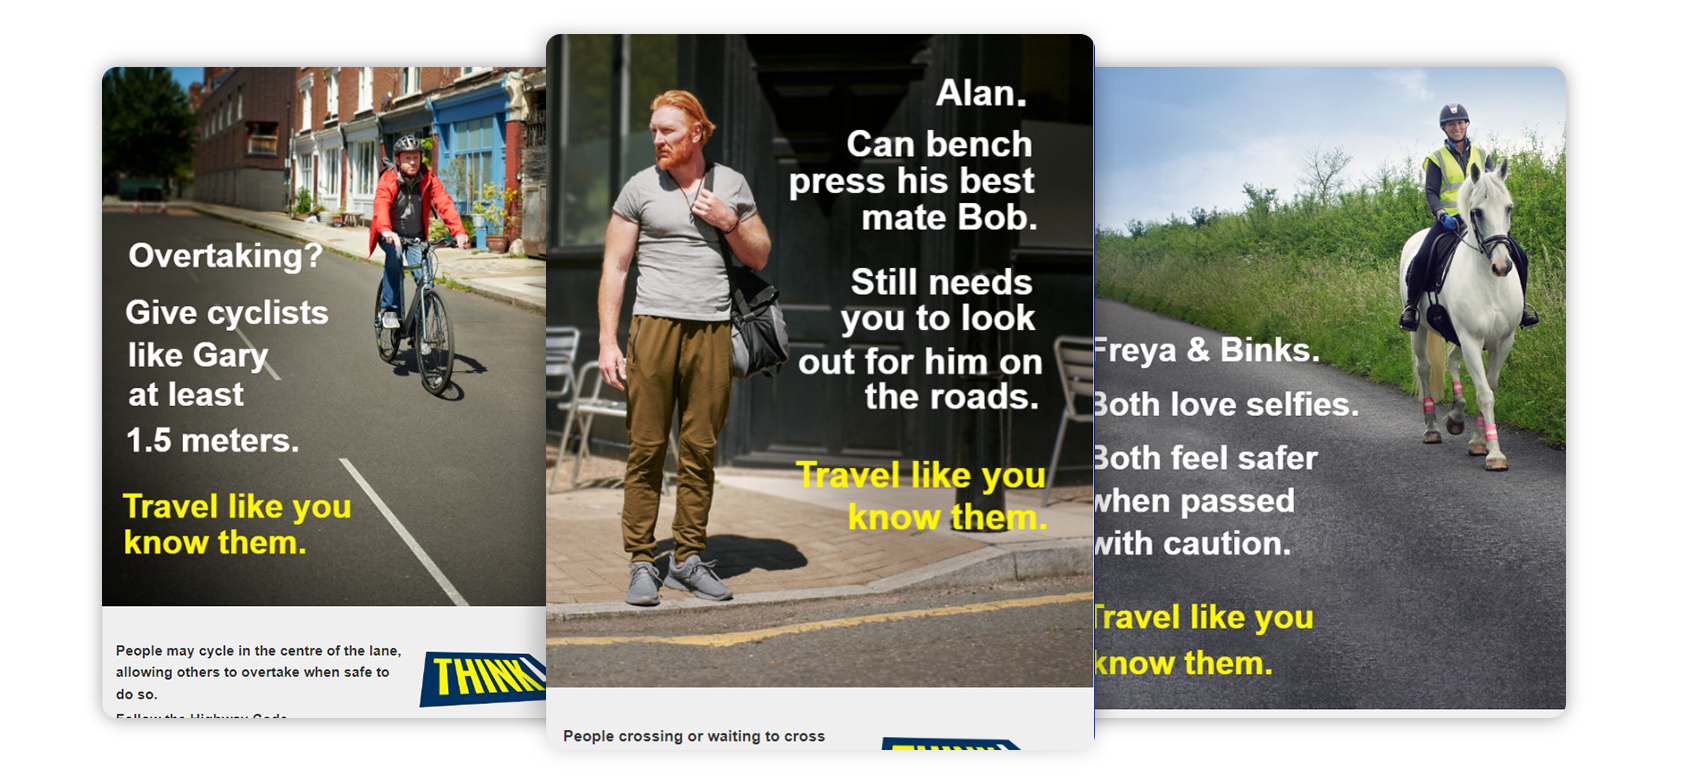 Email Library Campaign: THINK! ‘Travel Like You Know Them’